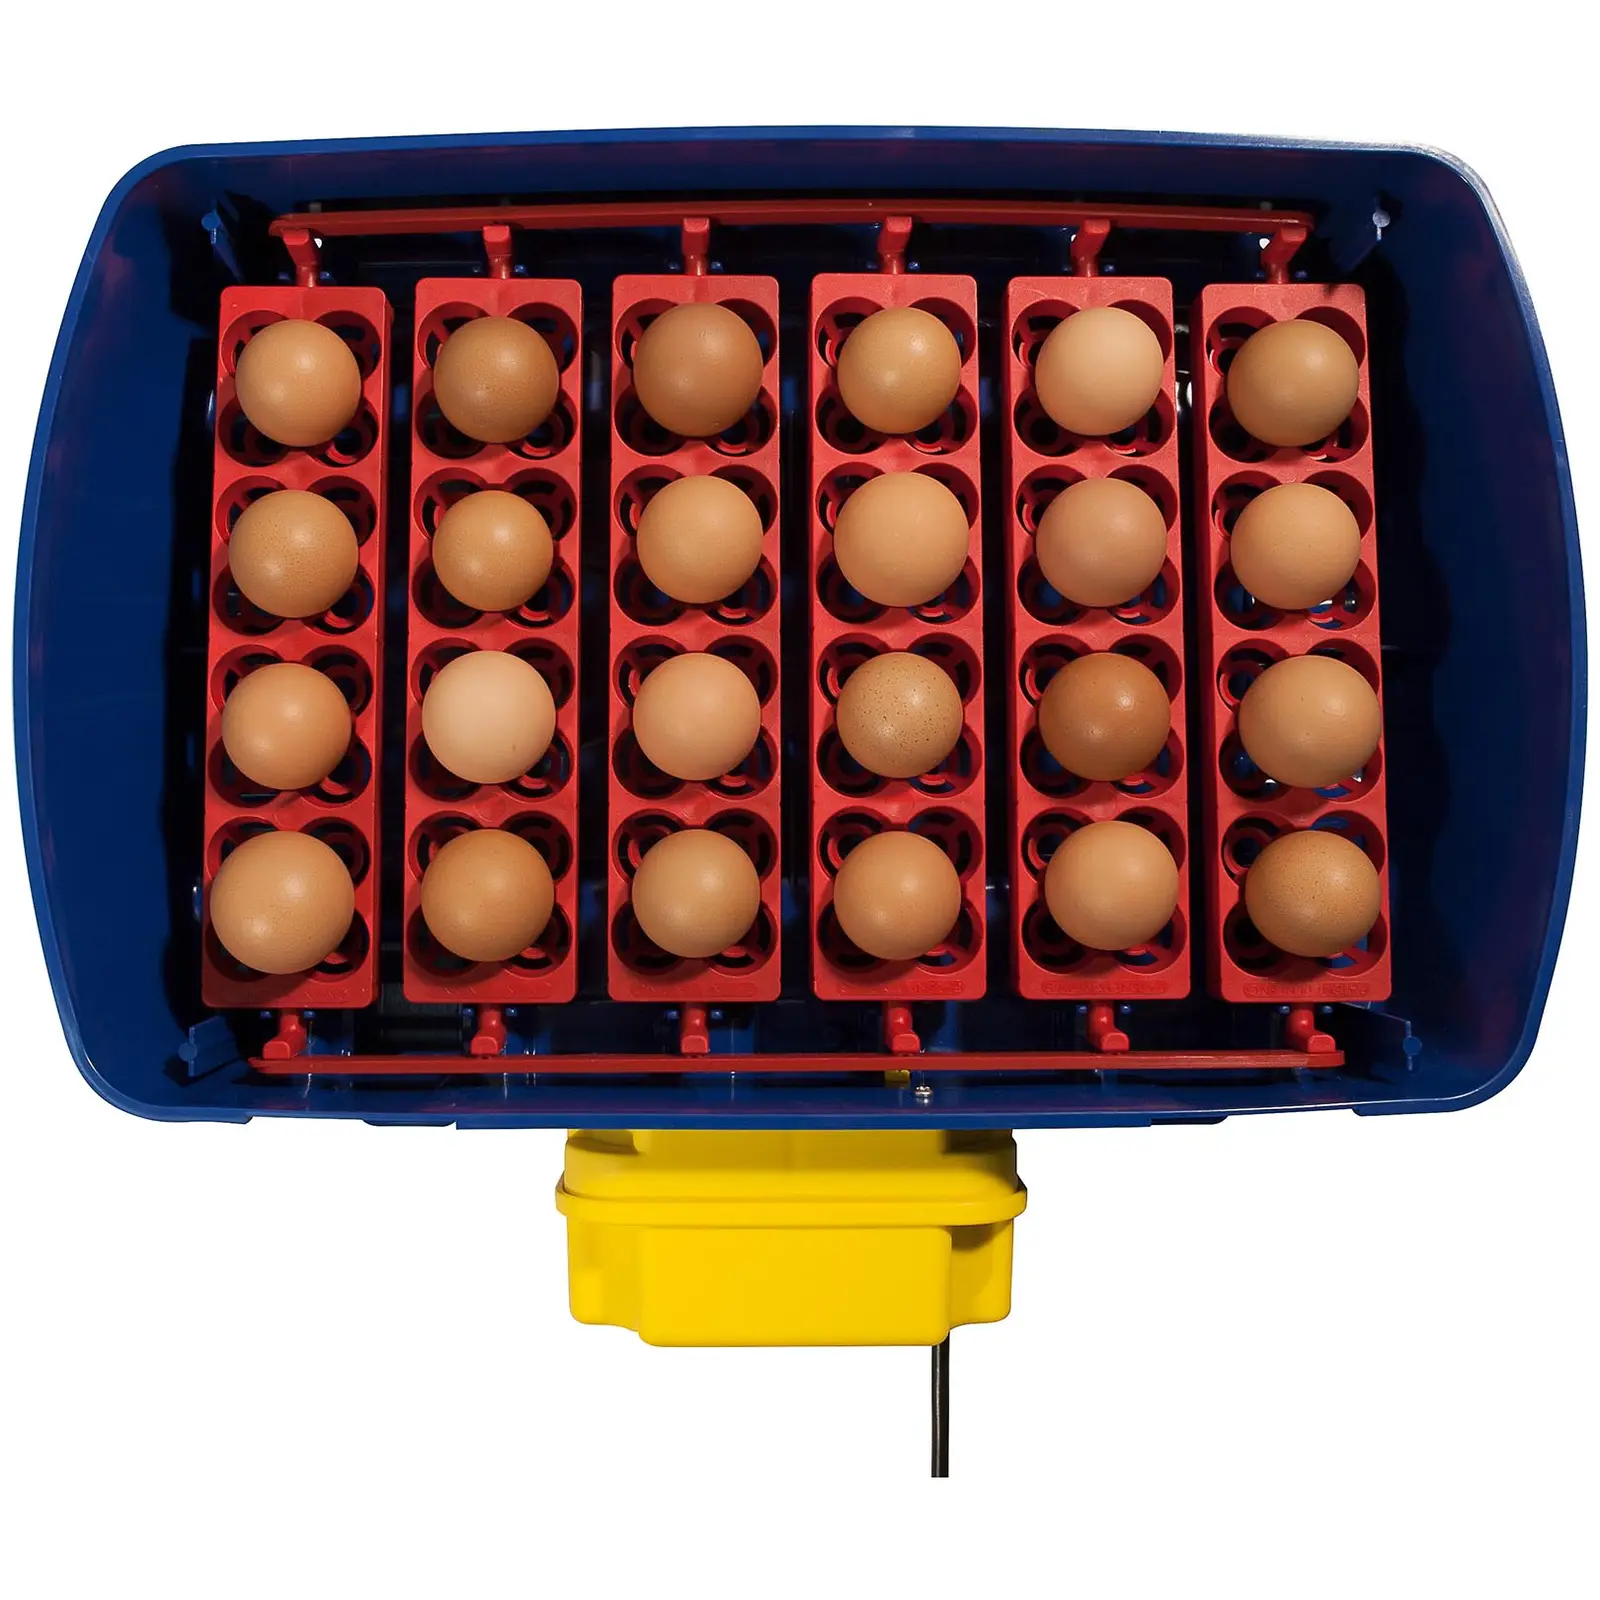 Incubator - 24 eggs - including watering system - fully automatic